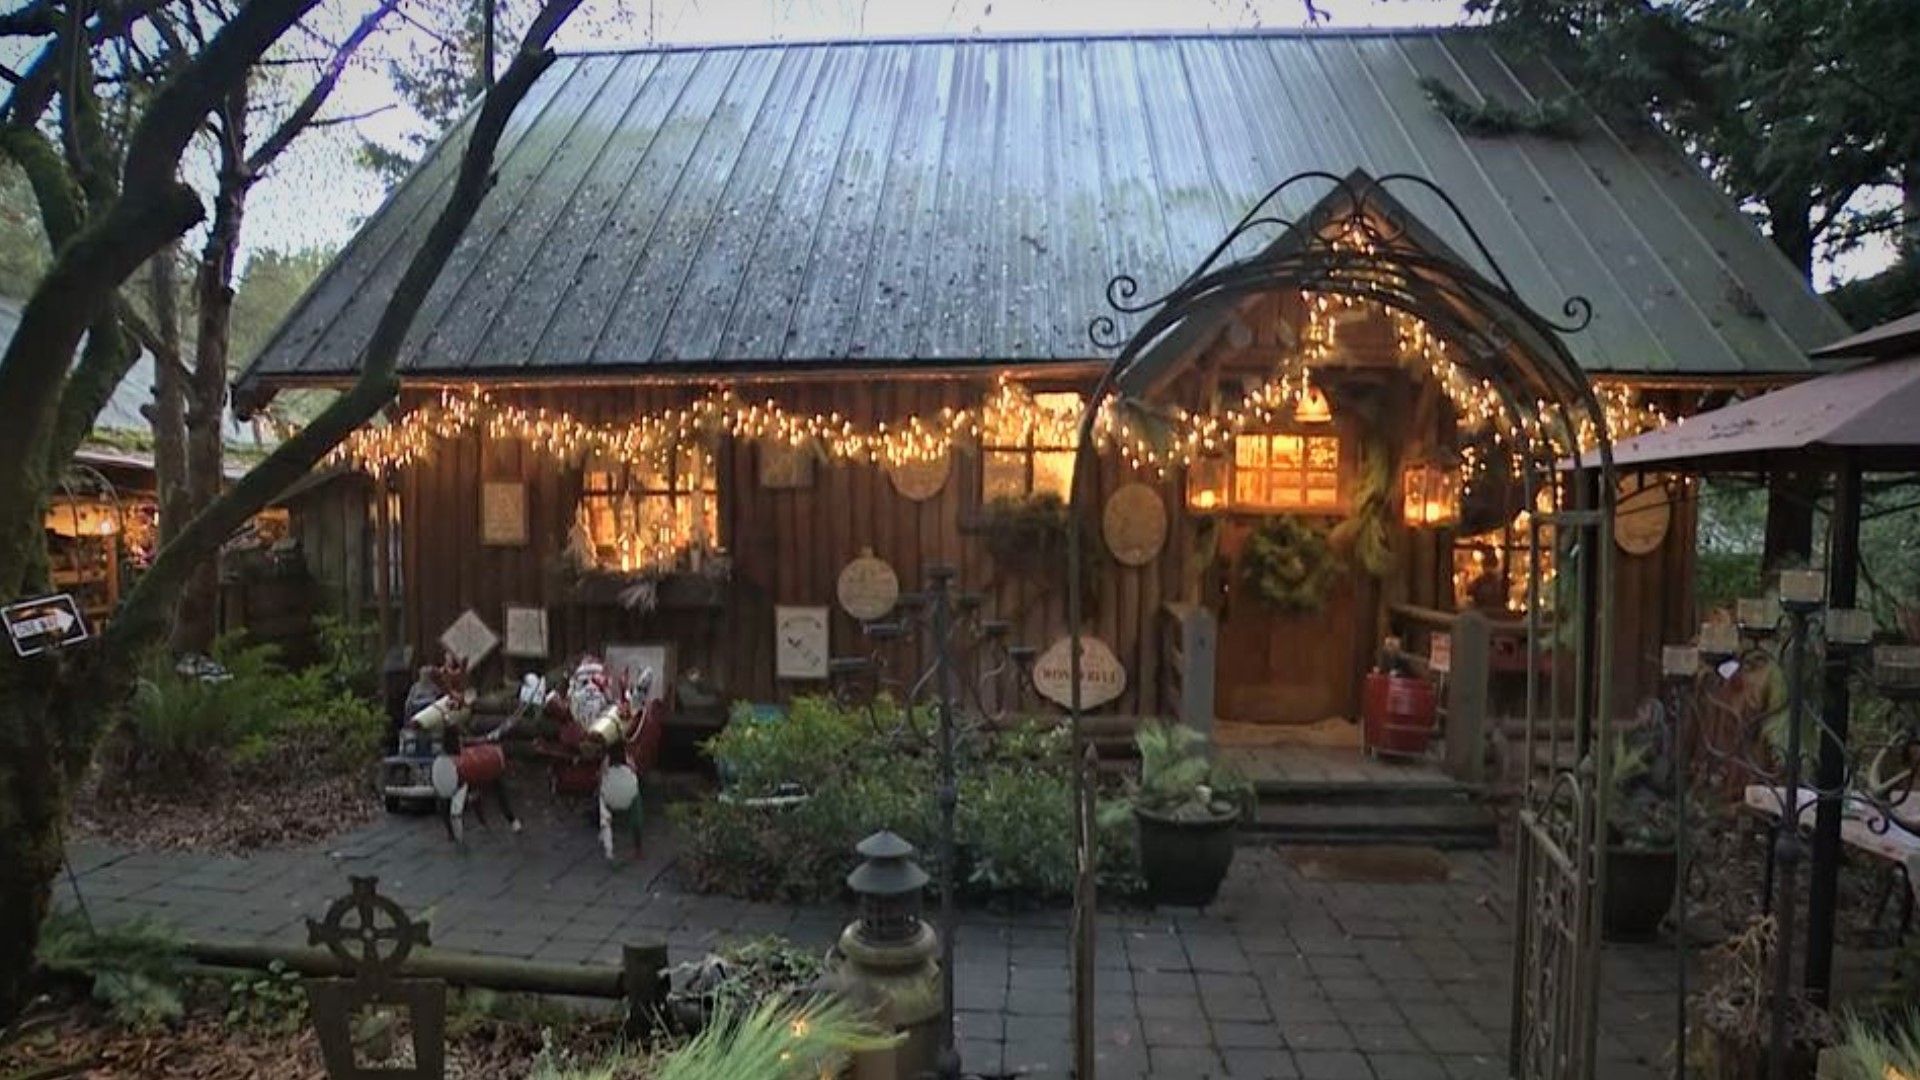 The Christmas Shop at Timber Creek is hidden away in a historic cabin